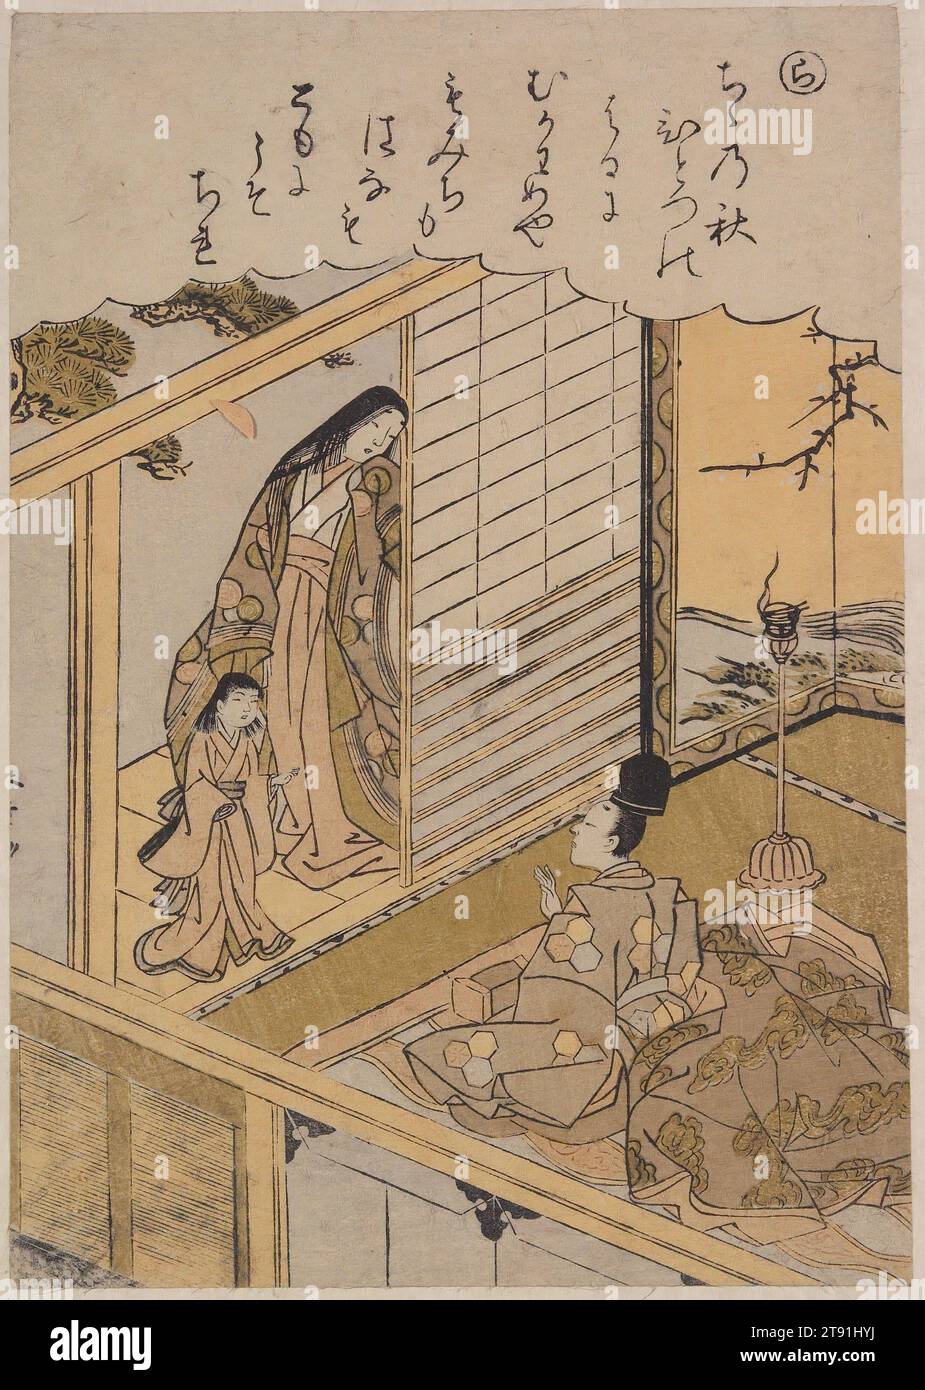 The Syllable Ra: Requesting a Painting from a Former Lover, c. 1770-1773, Katsukawa Shunshō, Japanese, 1726 - 1793, 8 11/16 × 6 in. (22 × 15.3 cm) (image, sheet, chūban), Woodblock print (nishiki-e); ink and color on paper, Japan, 18th century, Number 22 in the series, which follows the iroha-system Stock Photo